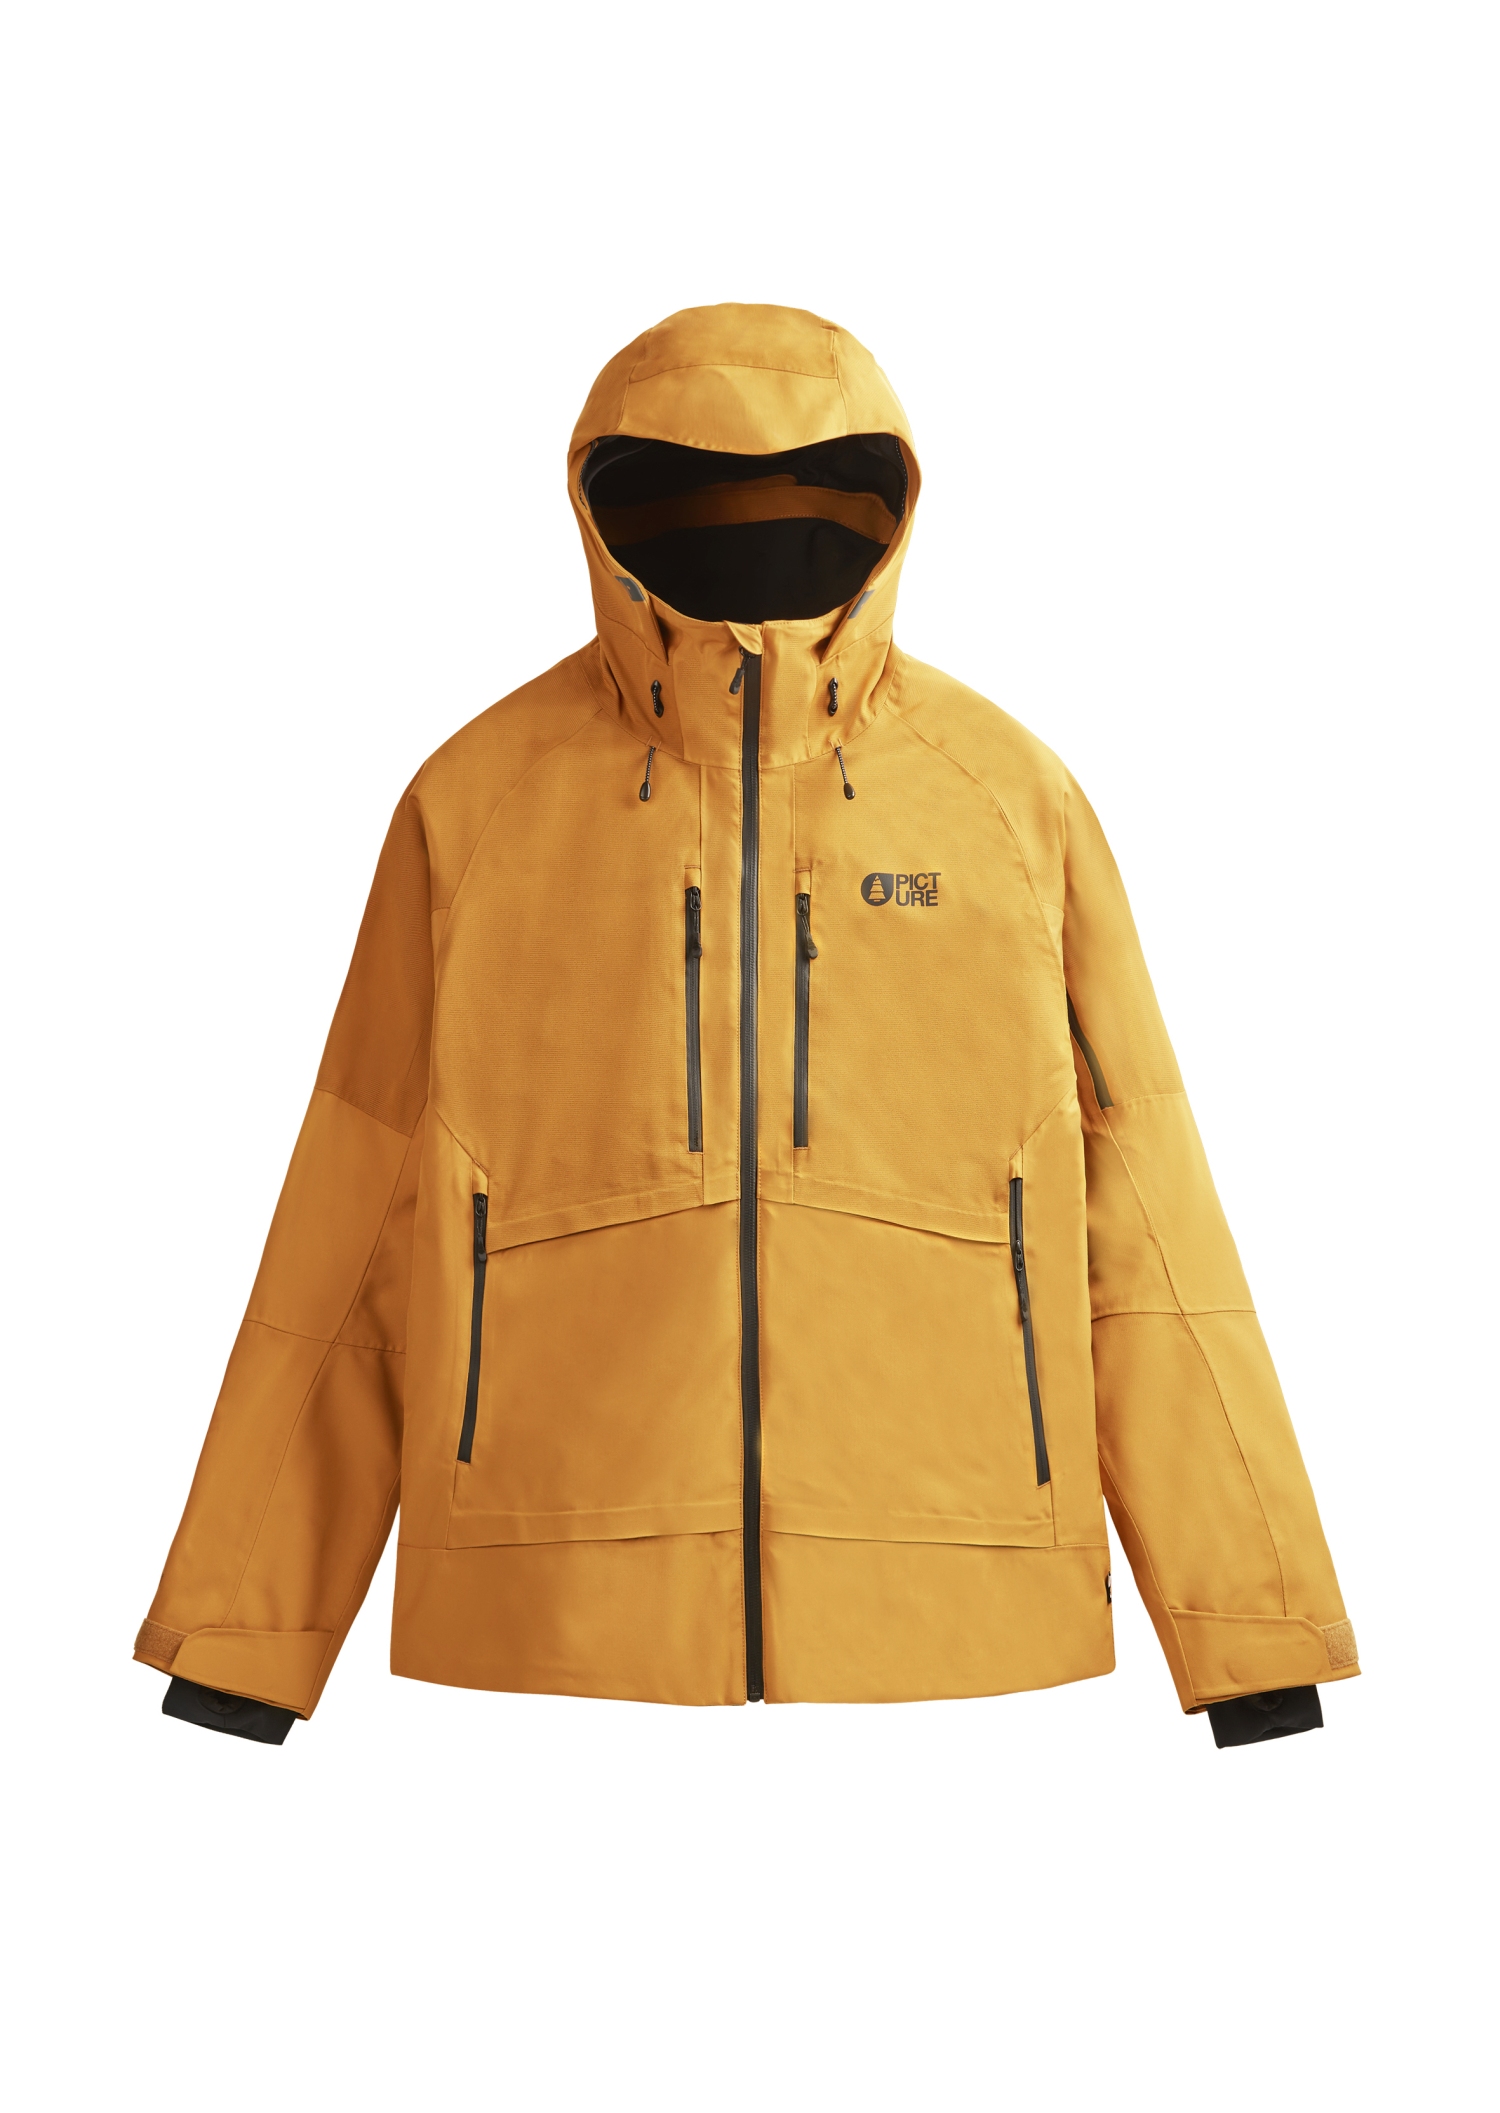 The North Face Summit Series on sale at Snowleader